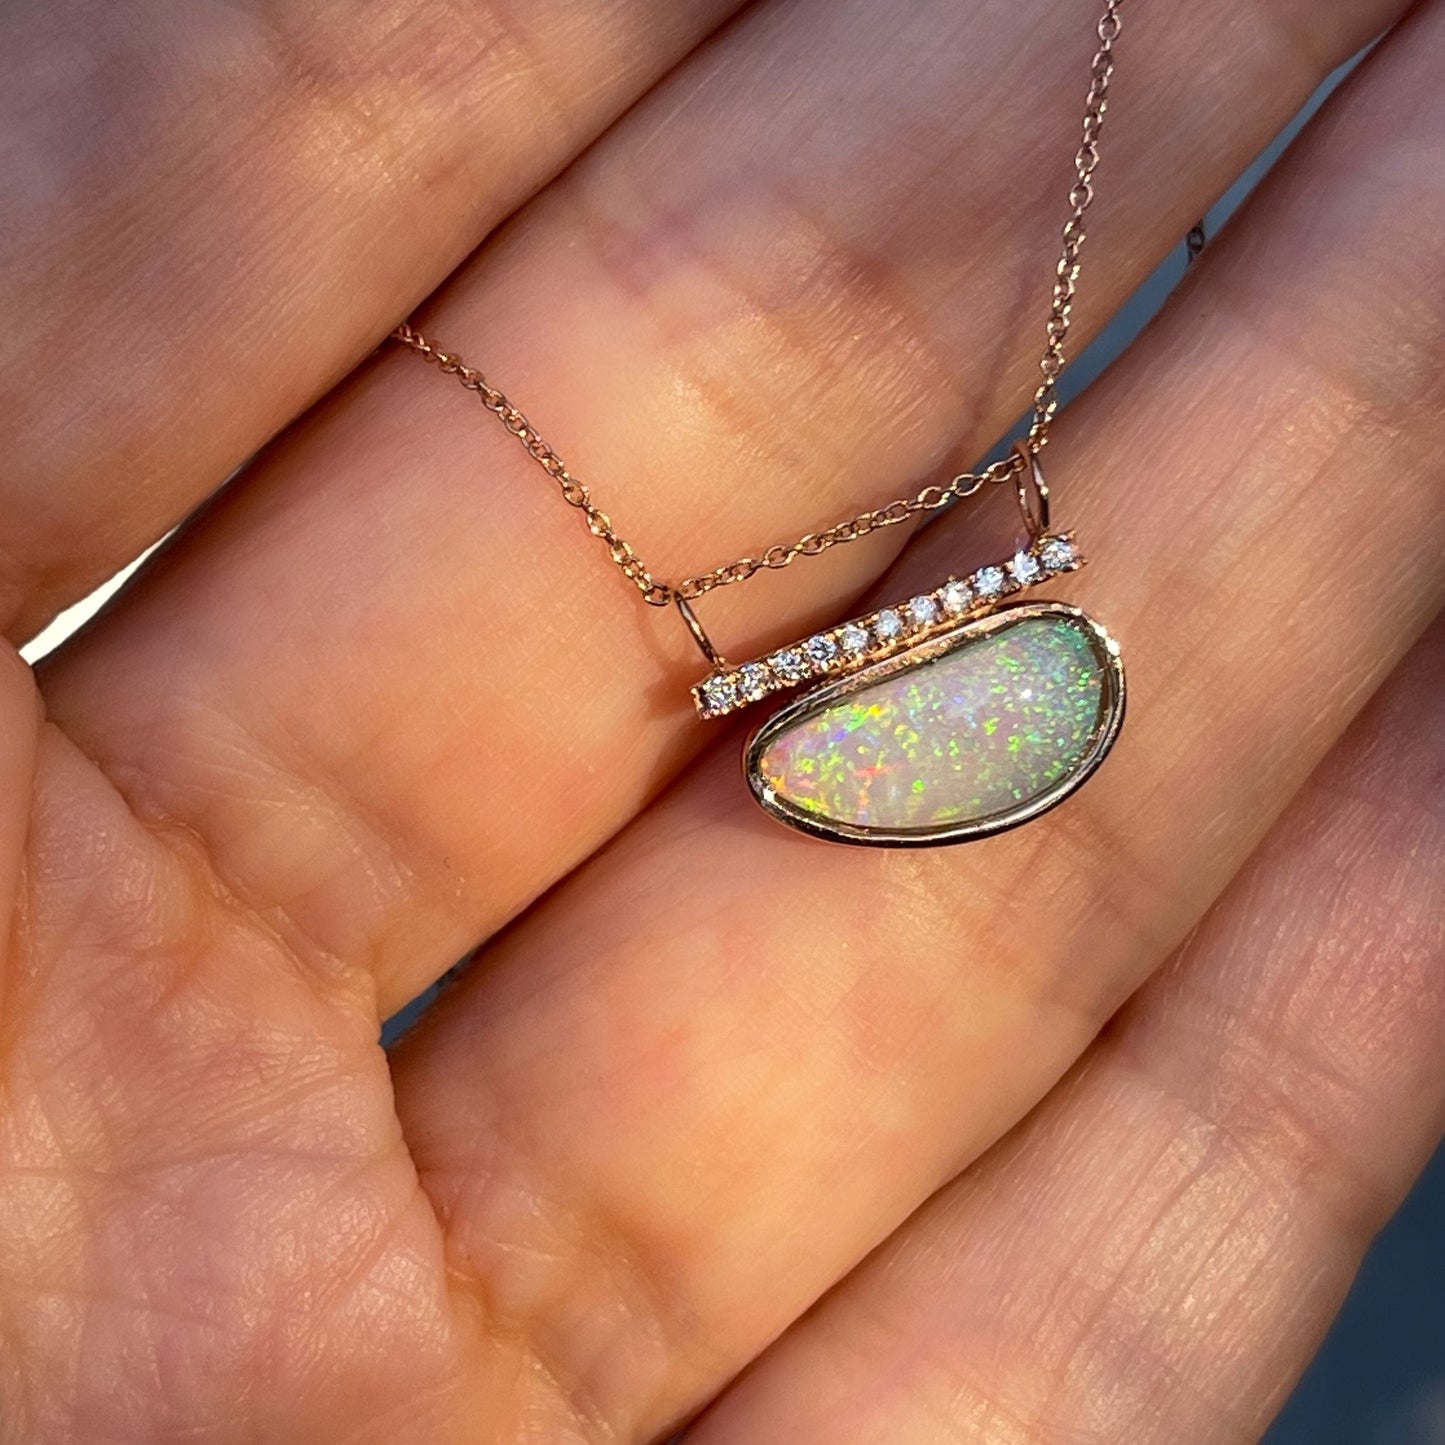 Coober Pedy opal necklace by NIXIN Jewelry shown against hand